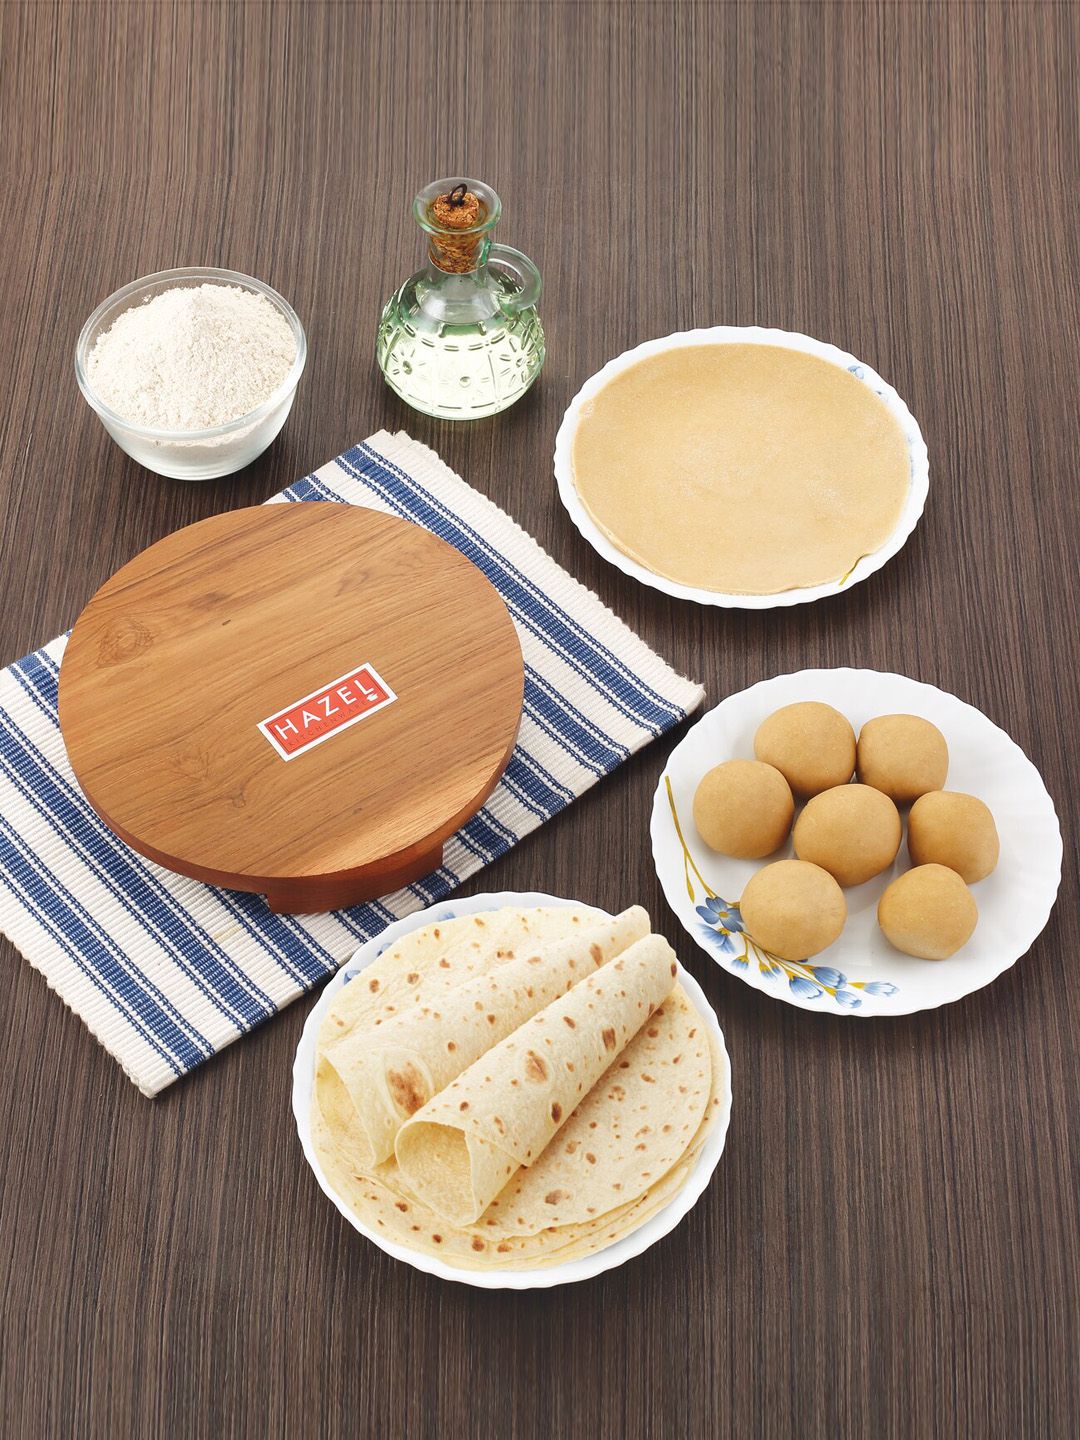 HAZEL Brown Wooden Chakla Roti Maker With Roller Price in India